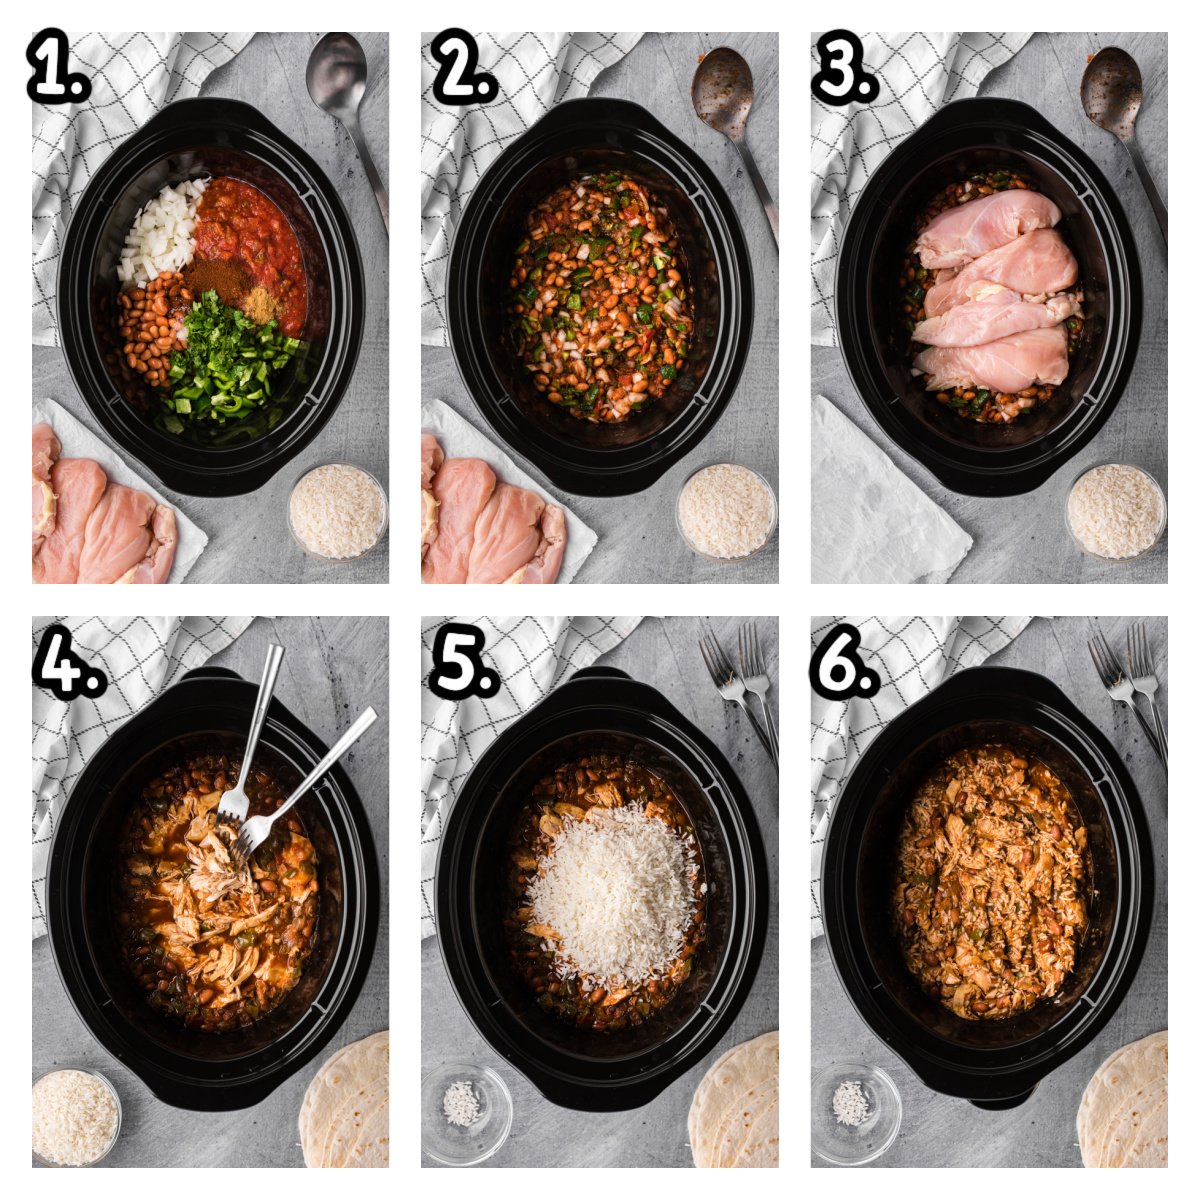 Six images showing how to make one pot burrito bowls.